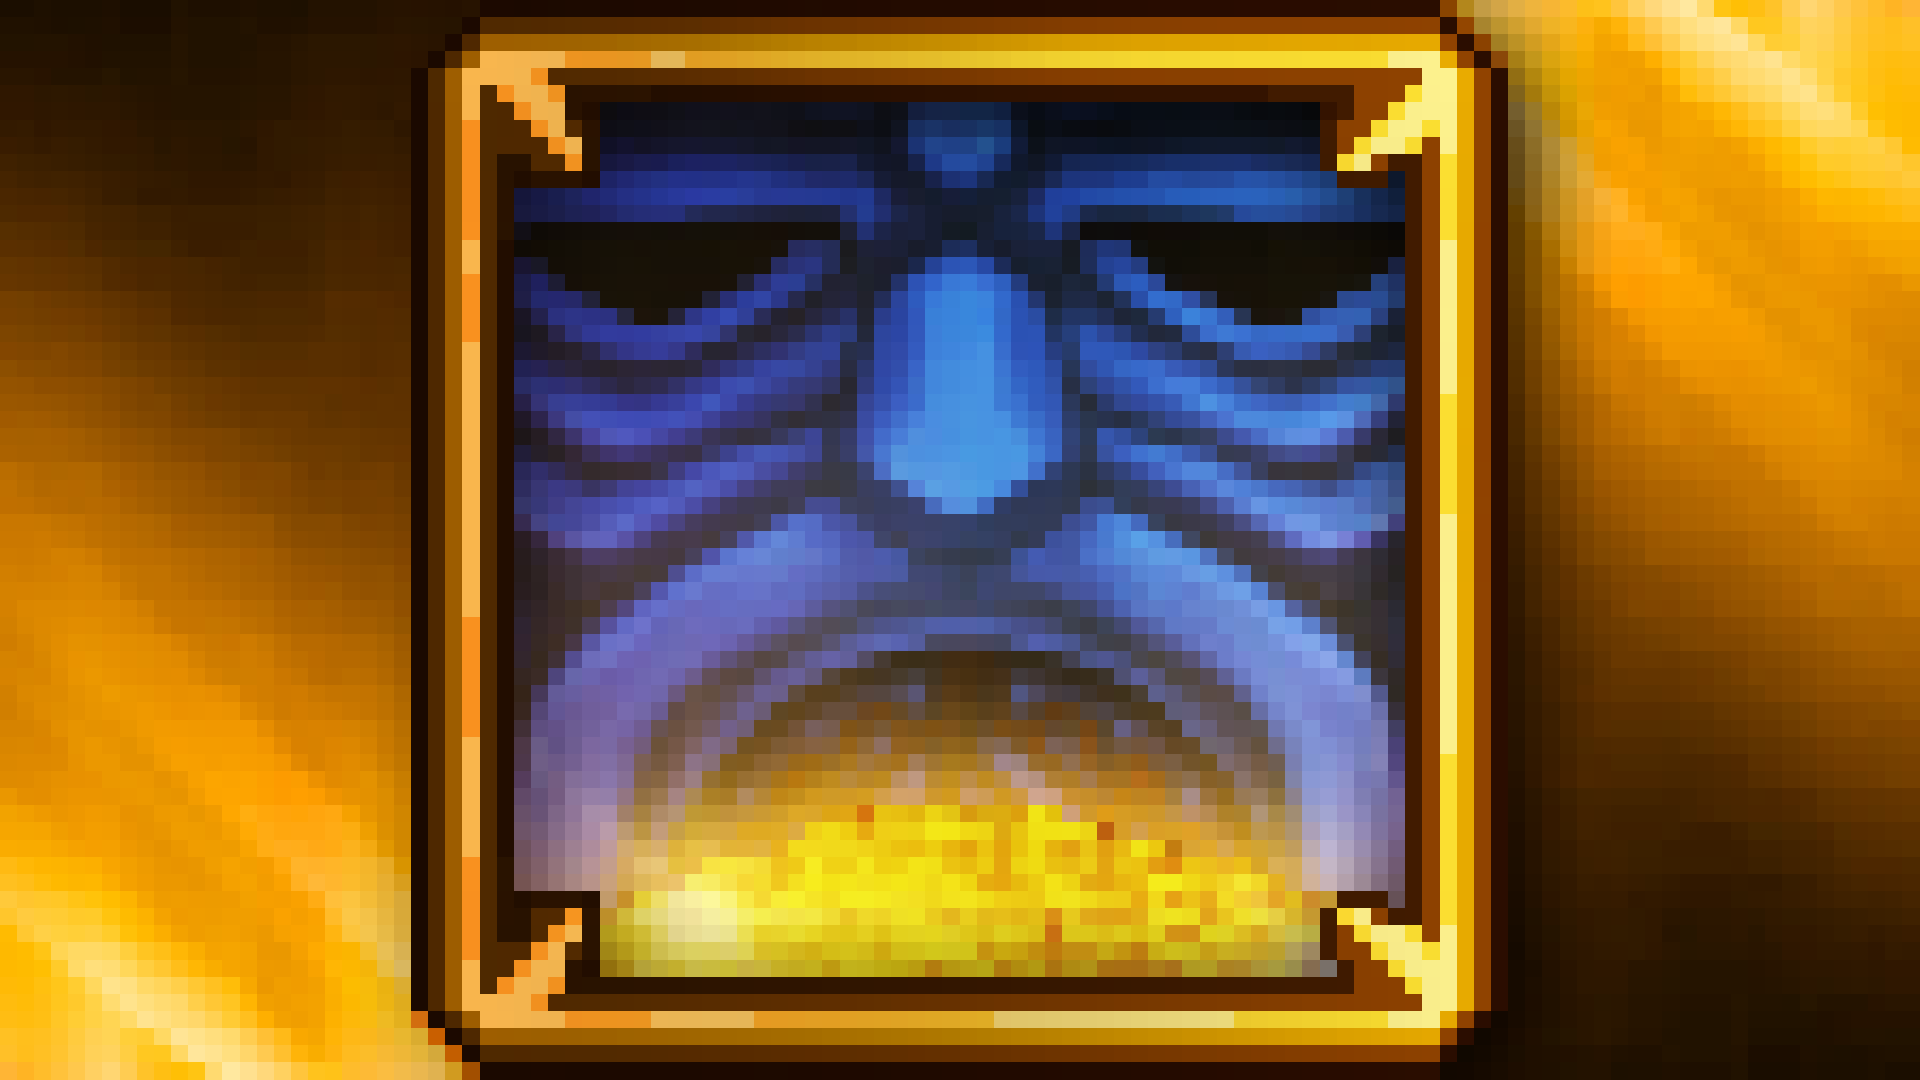 Icon for I Can Smell Gold